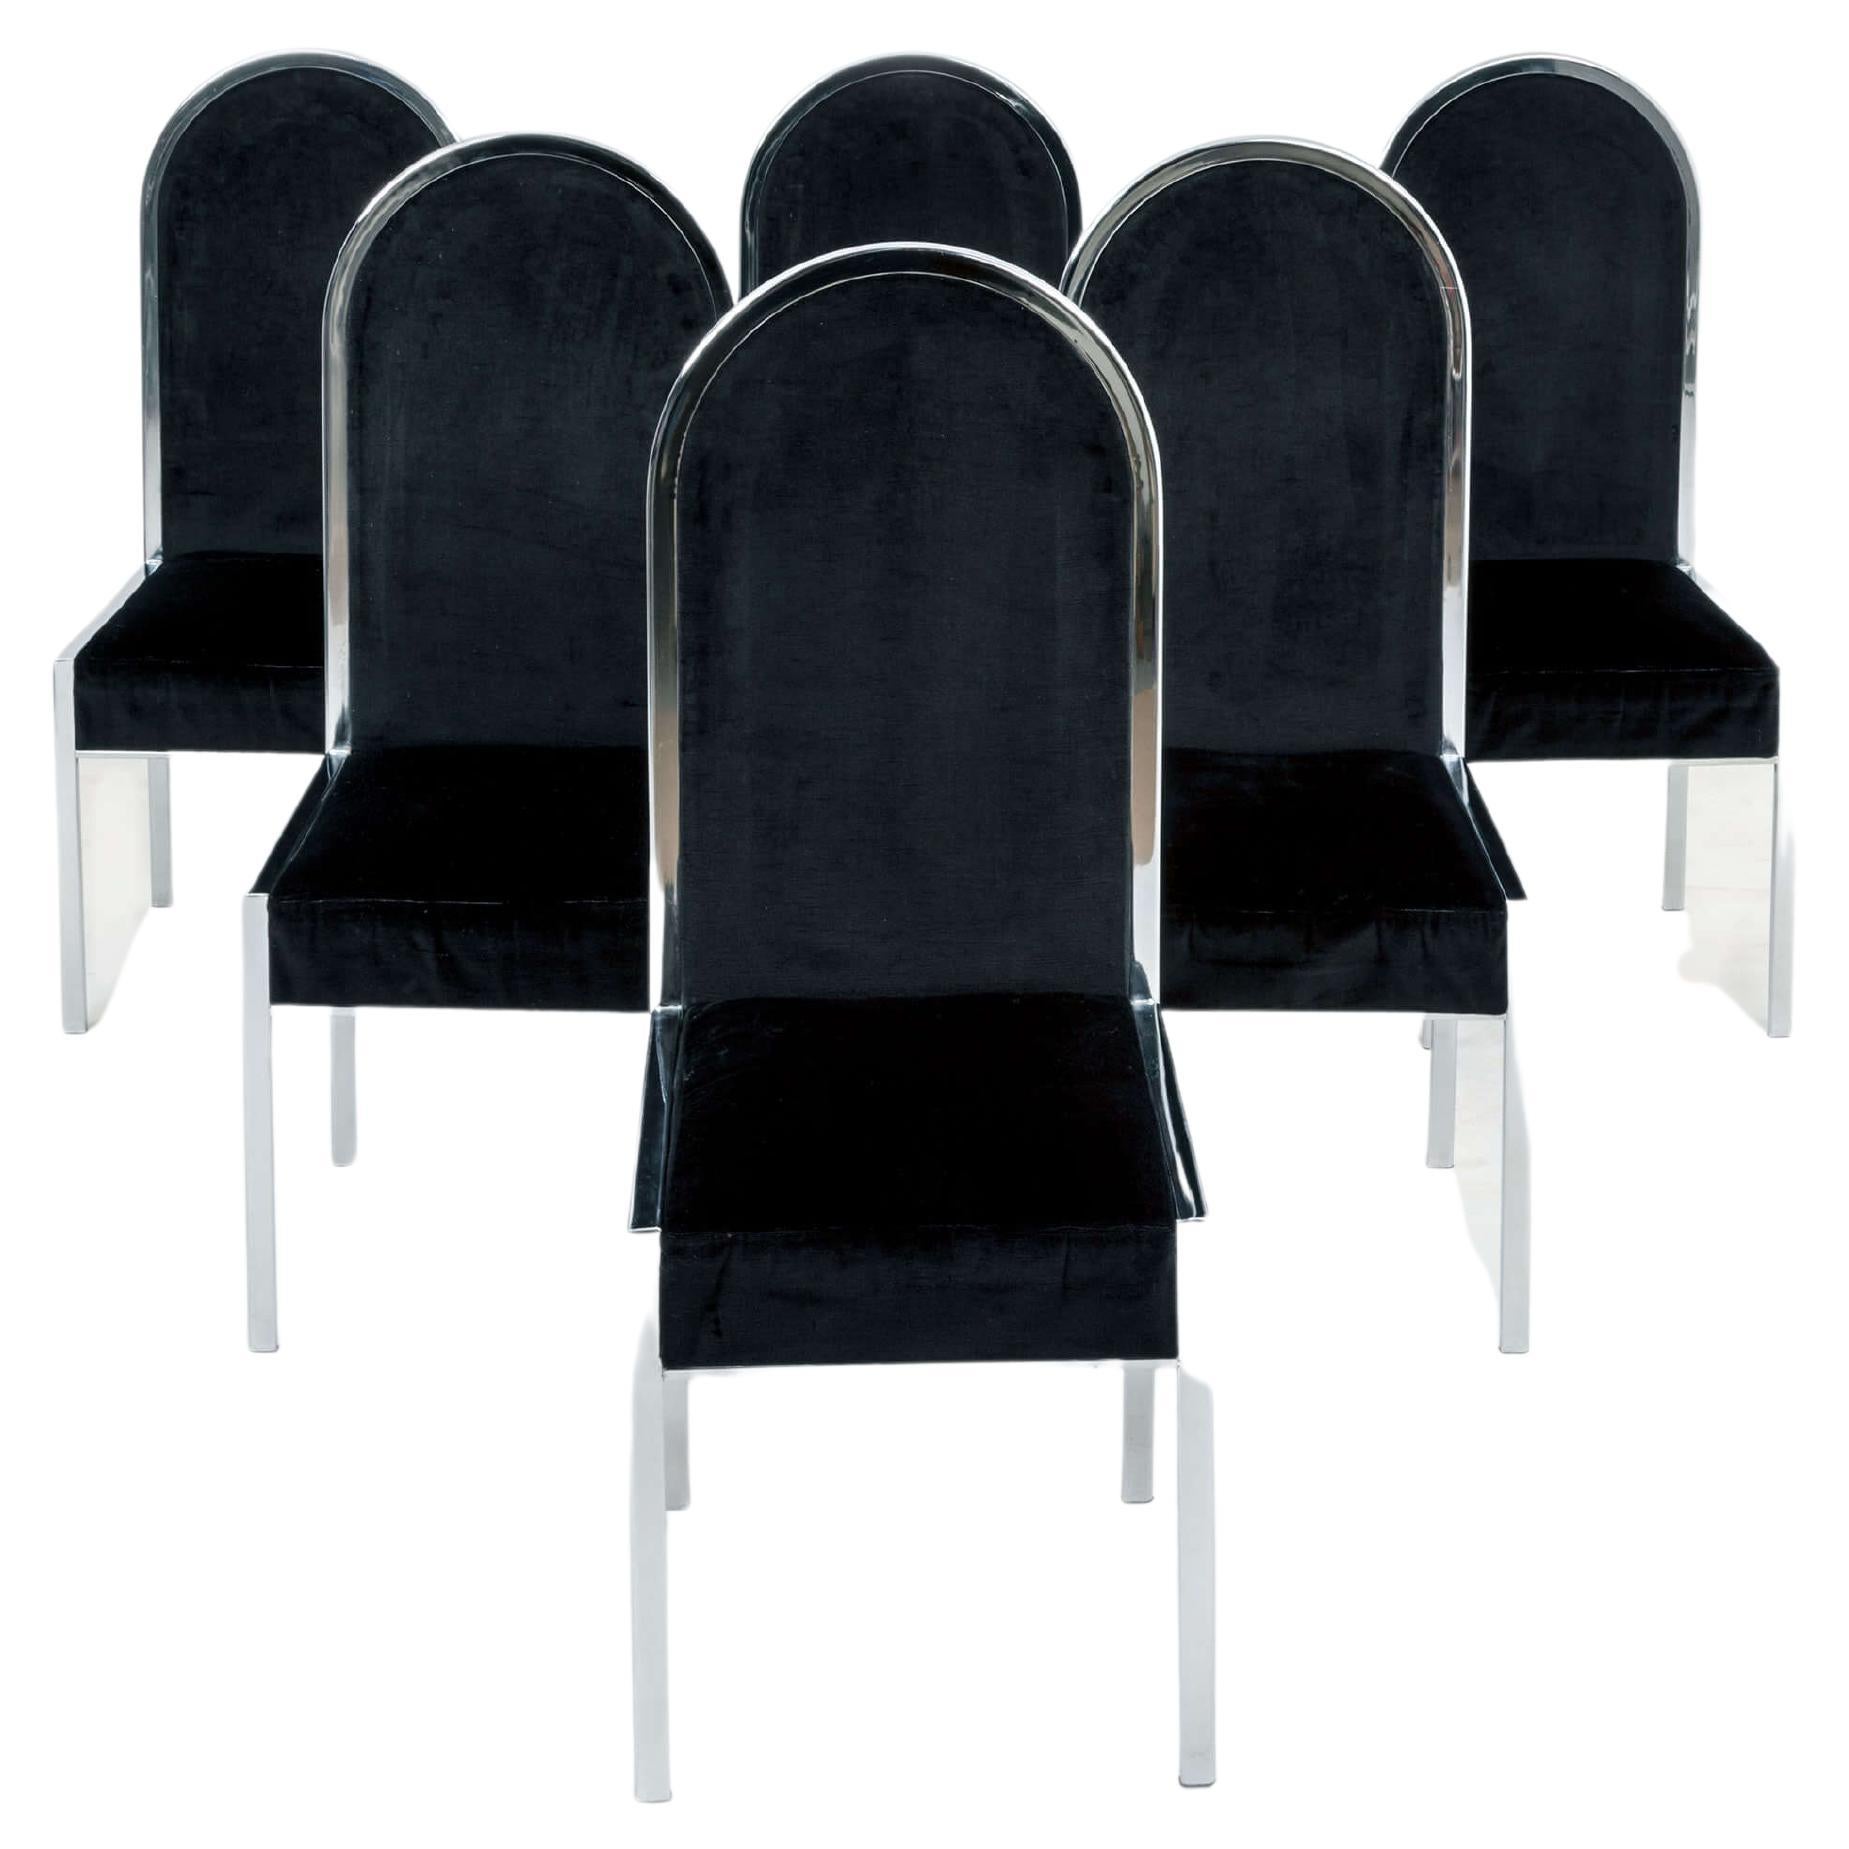 Set of Six Dining Chairs with a Chrome Framed Black Velvet Upholstery